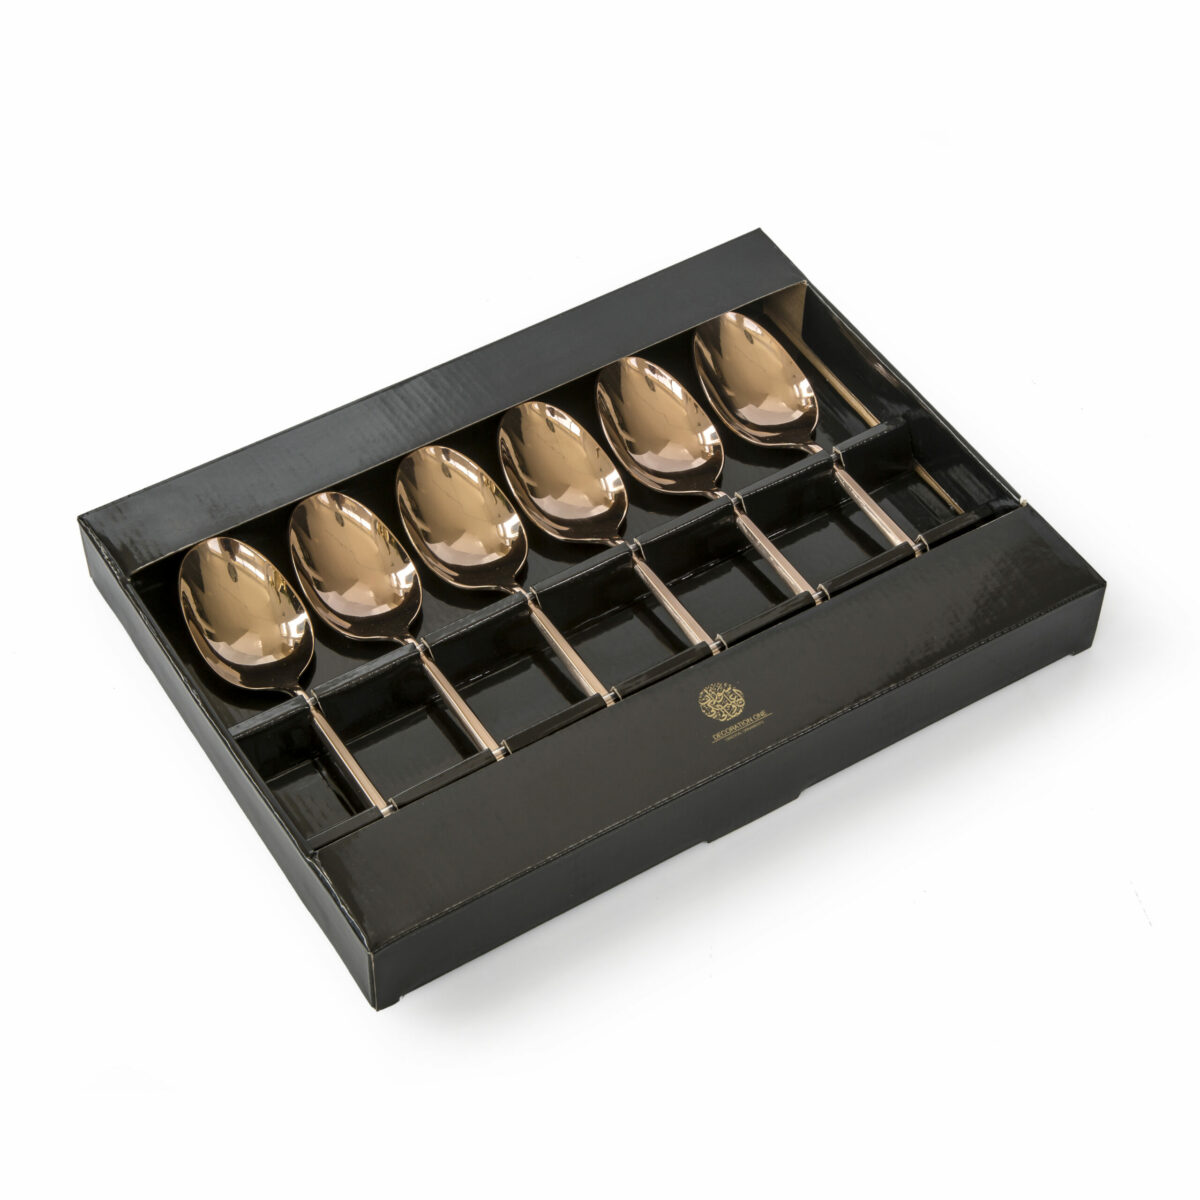 A set of rose-gold color stainless steal cutlery, comes with 6 pieces of serving spoons.